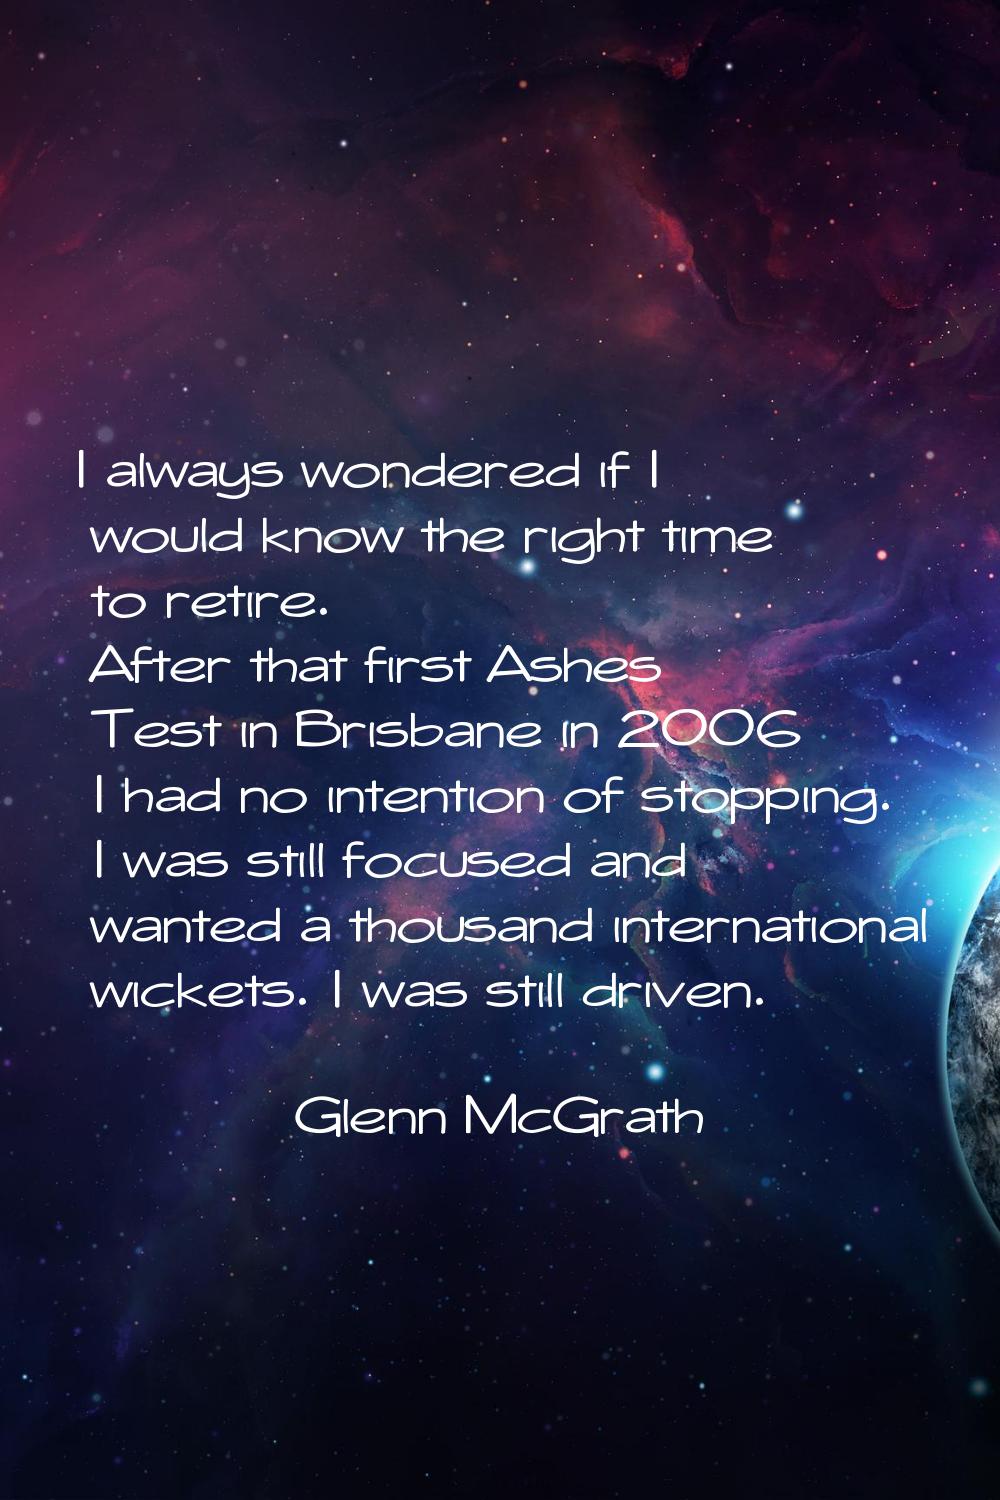 I always wondered if I would know the right time to retire. After that first Ashes Test in Brisbane